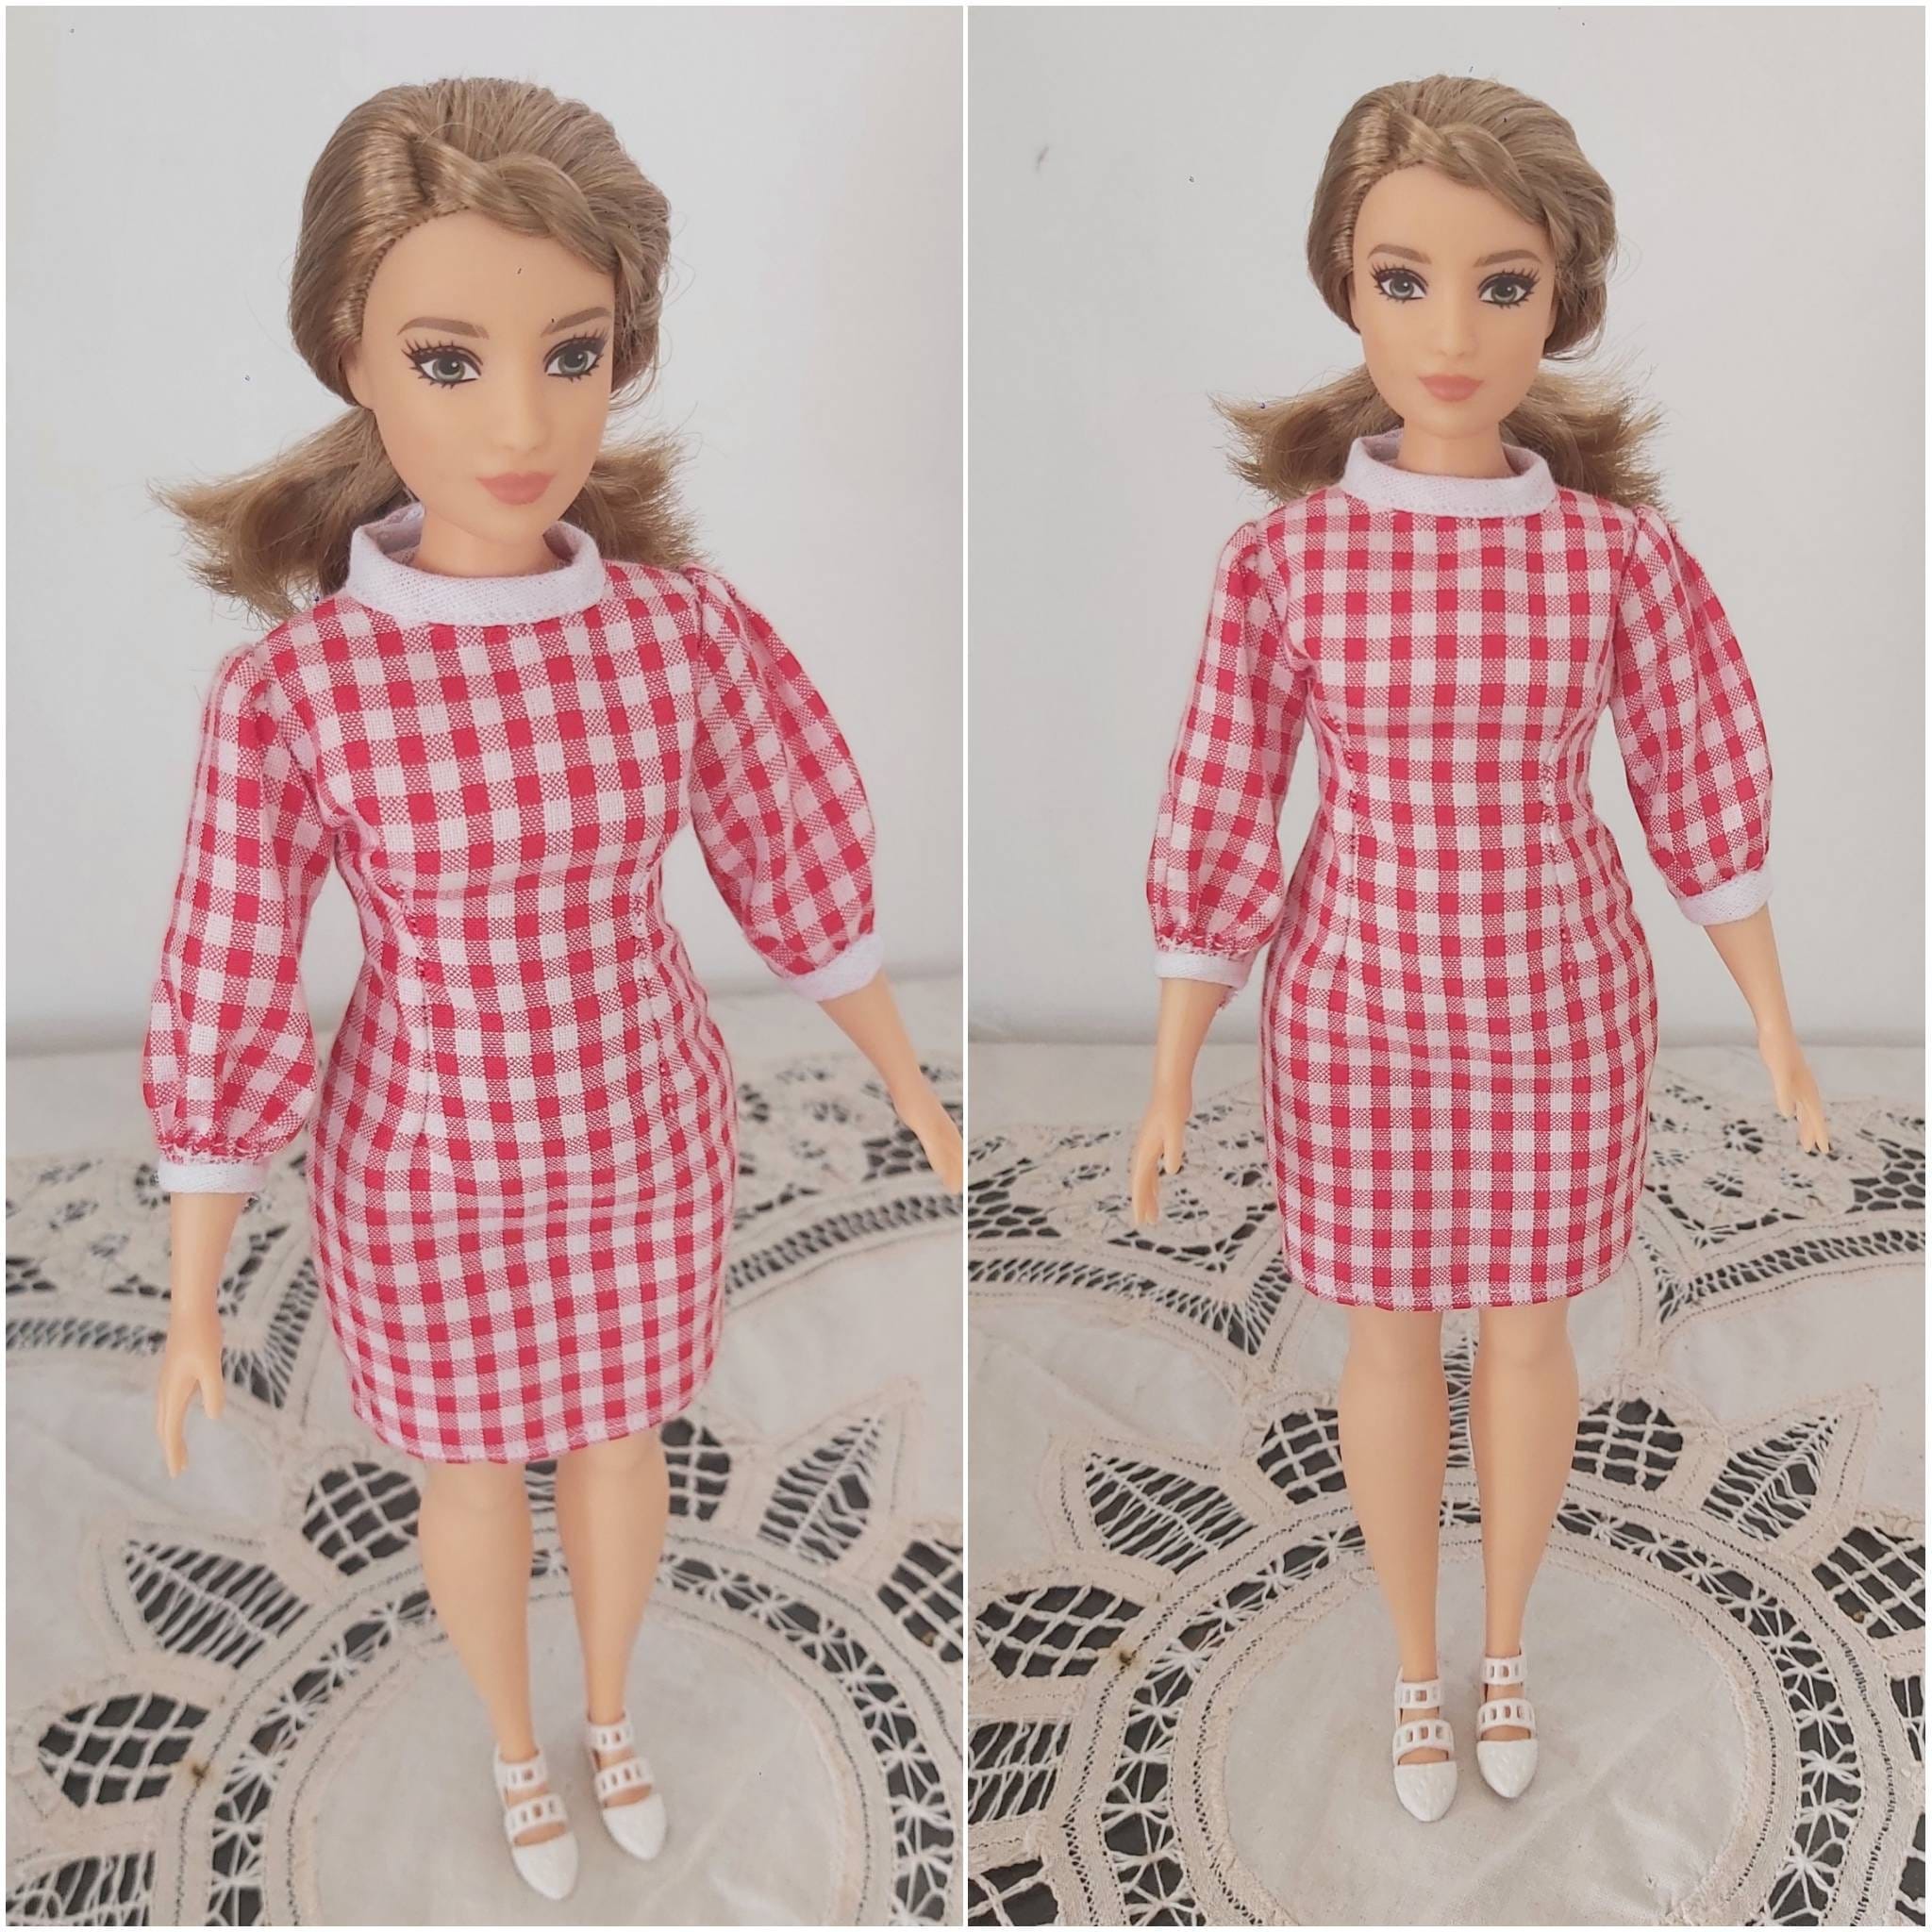 №093 Clothes for Curvy Barbie Doll Blouse and Leggings for Dolls. 